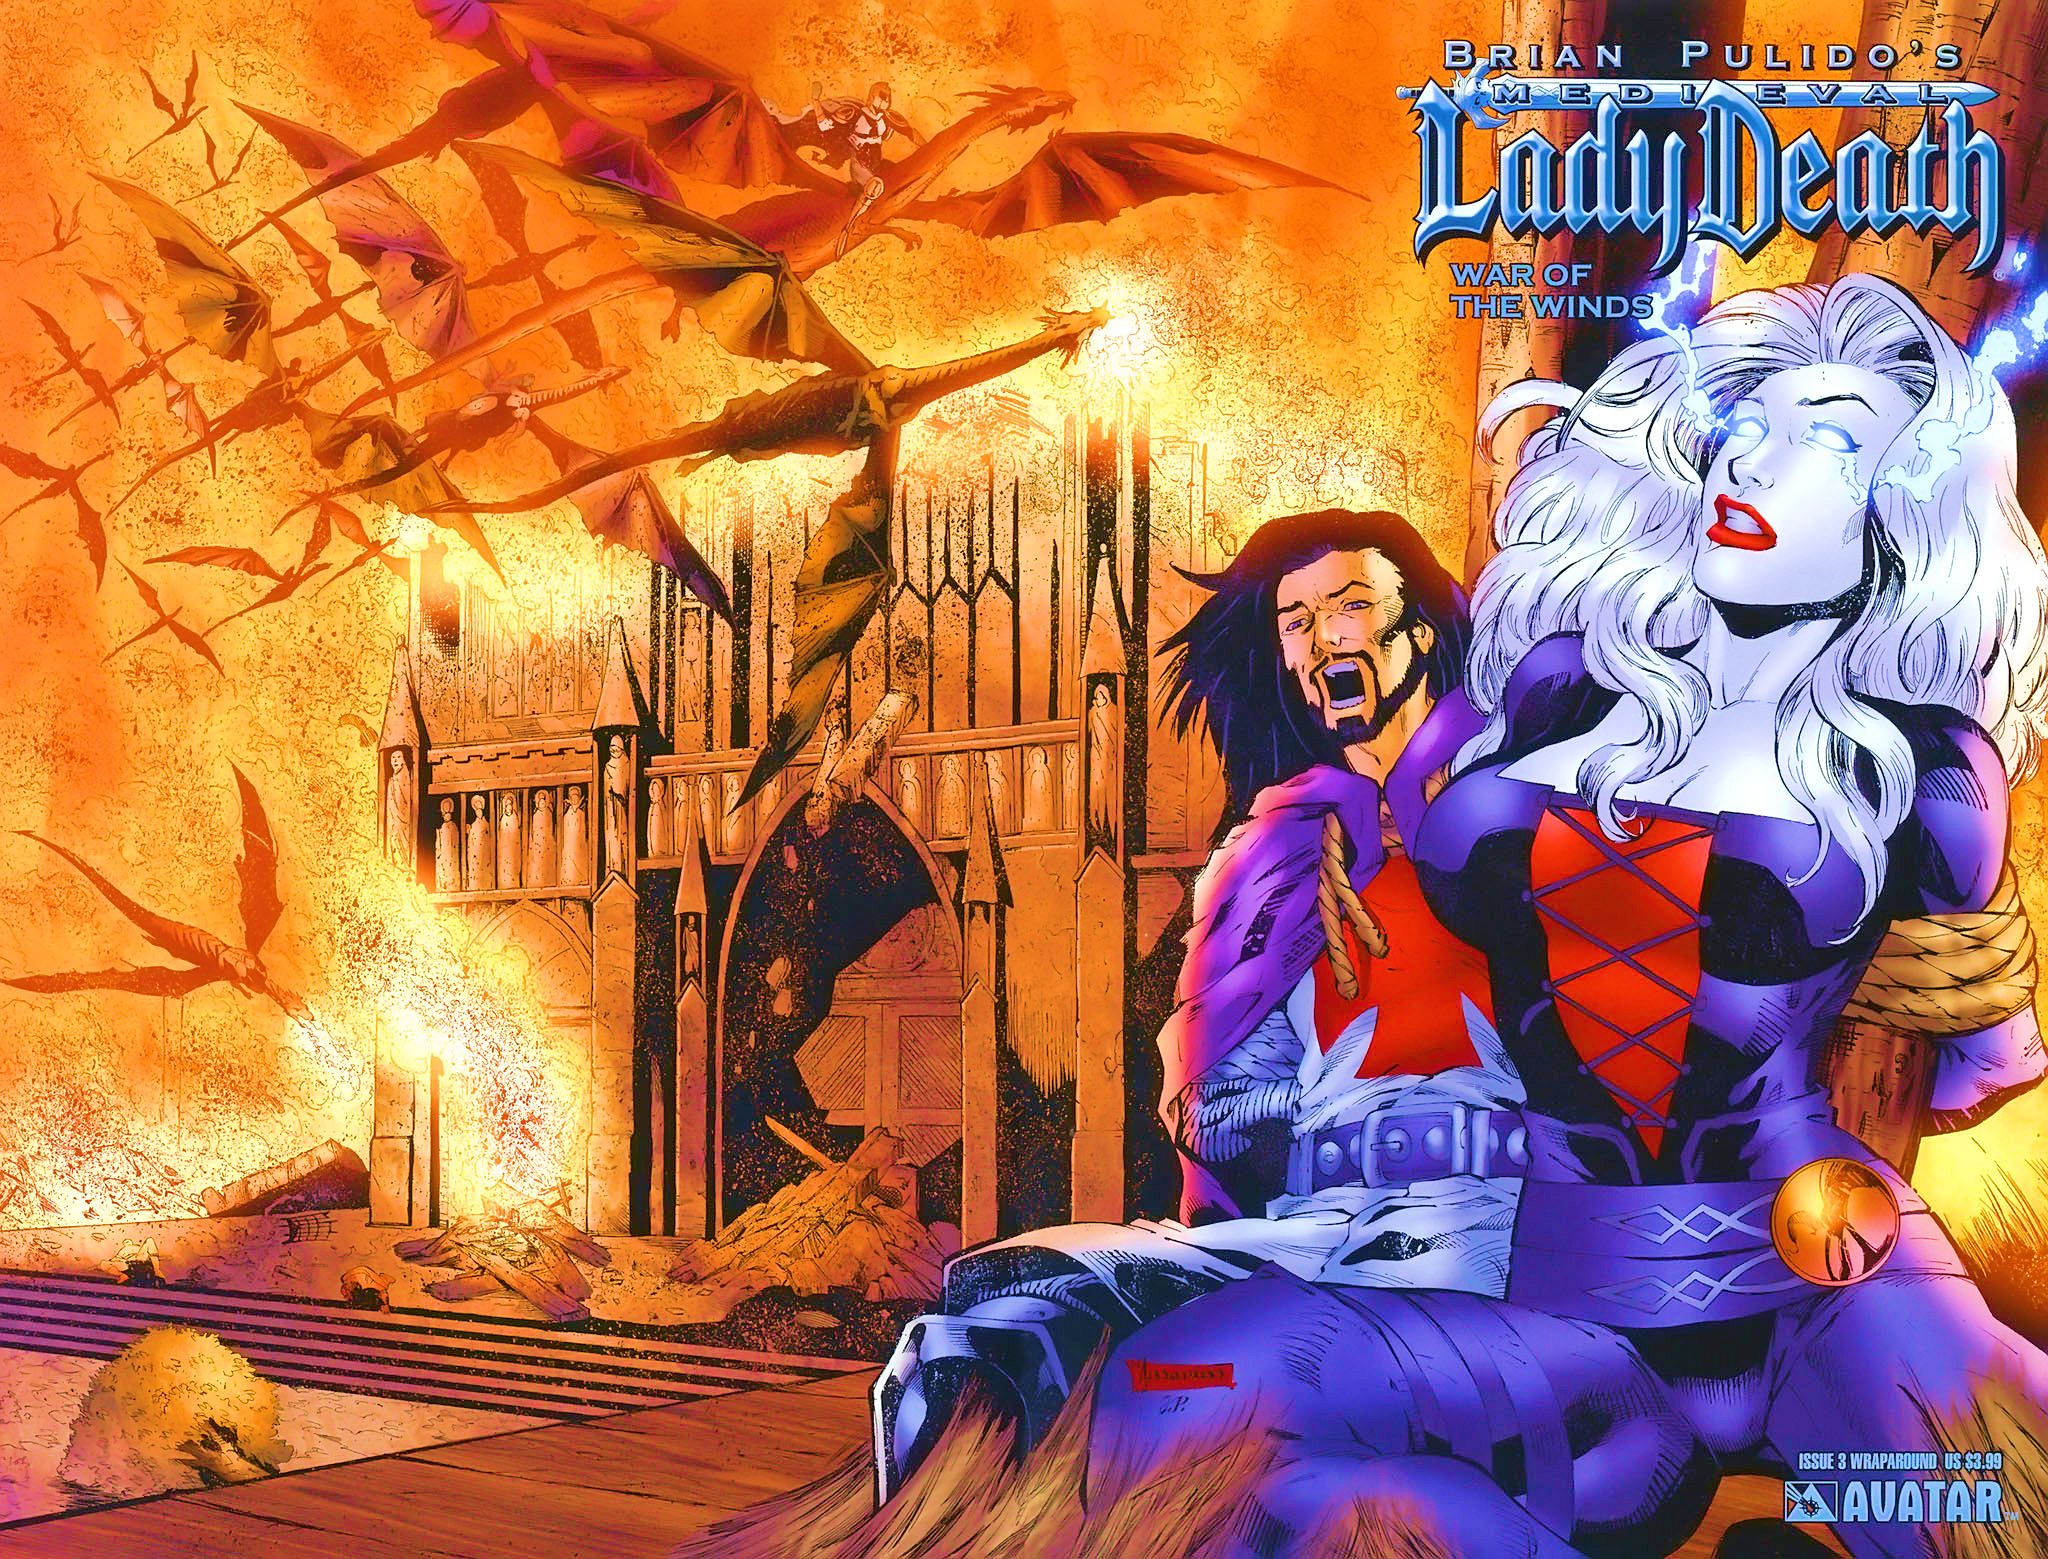 Read online Brian Pulido's Medieval Lady Death:  War of the Winds comic -  Issue #3 - 3